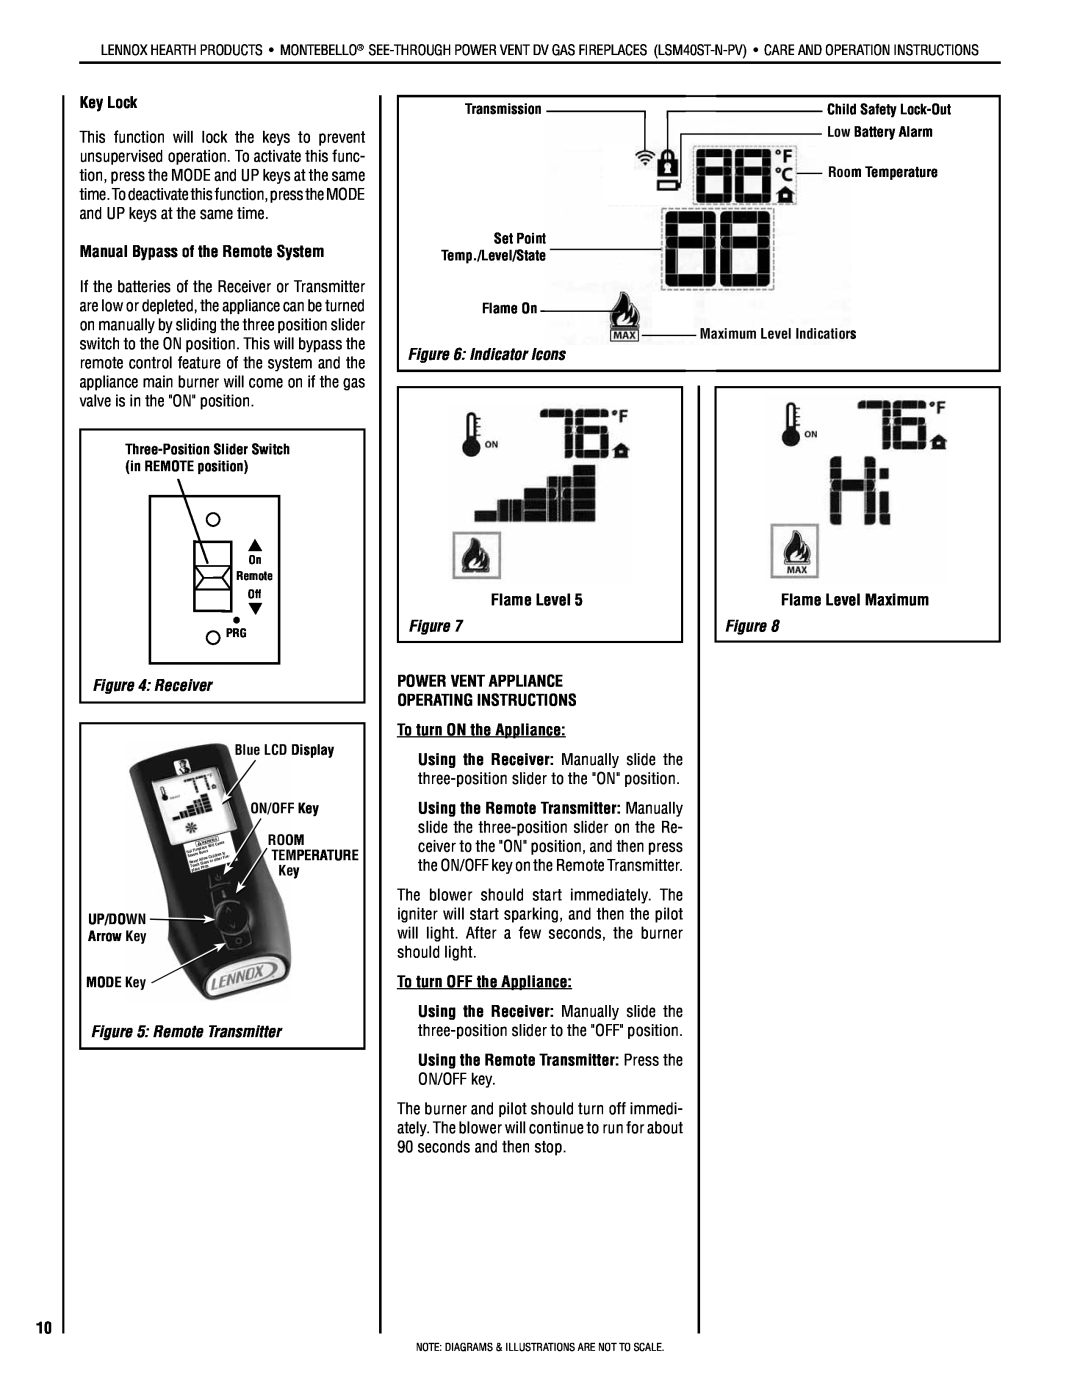 Lennox Hearth LSM40ST-N-PV installation instructions Indicator Icons, Receiver, Figure, Remote Transmitter 